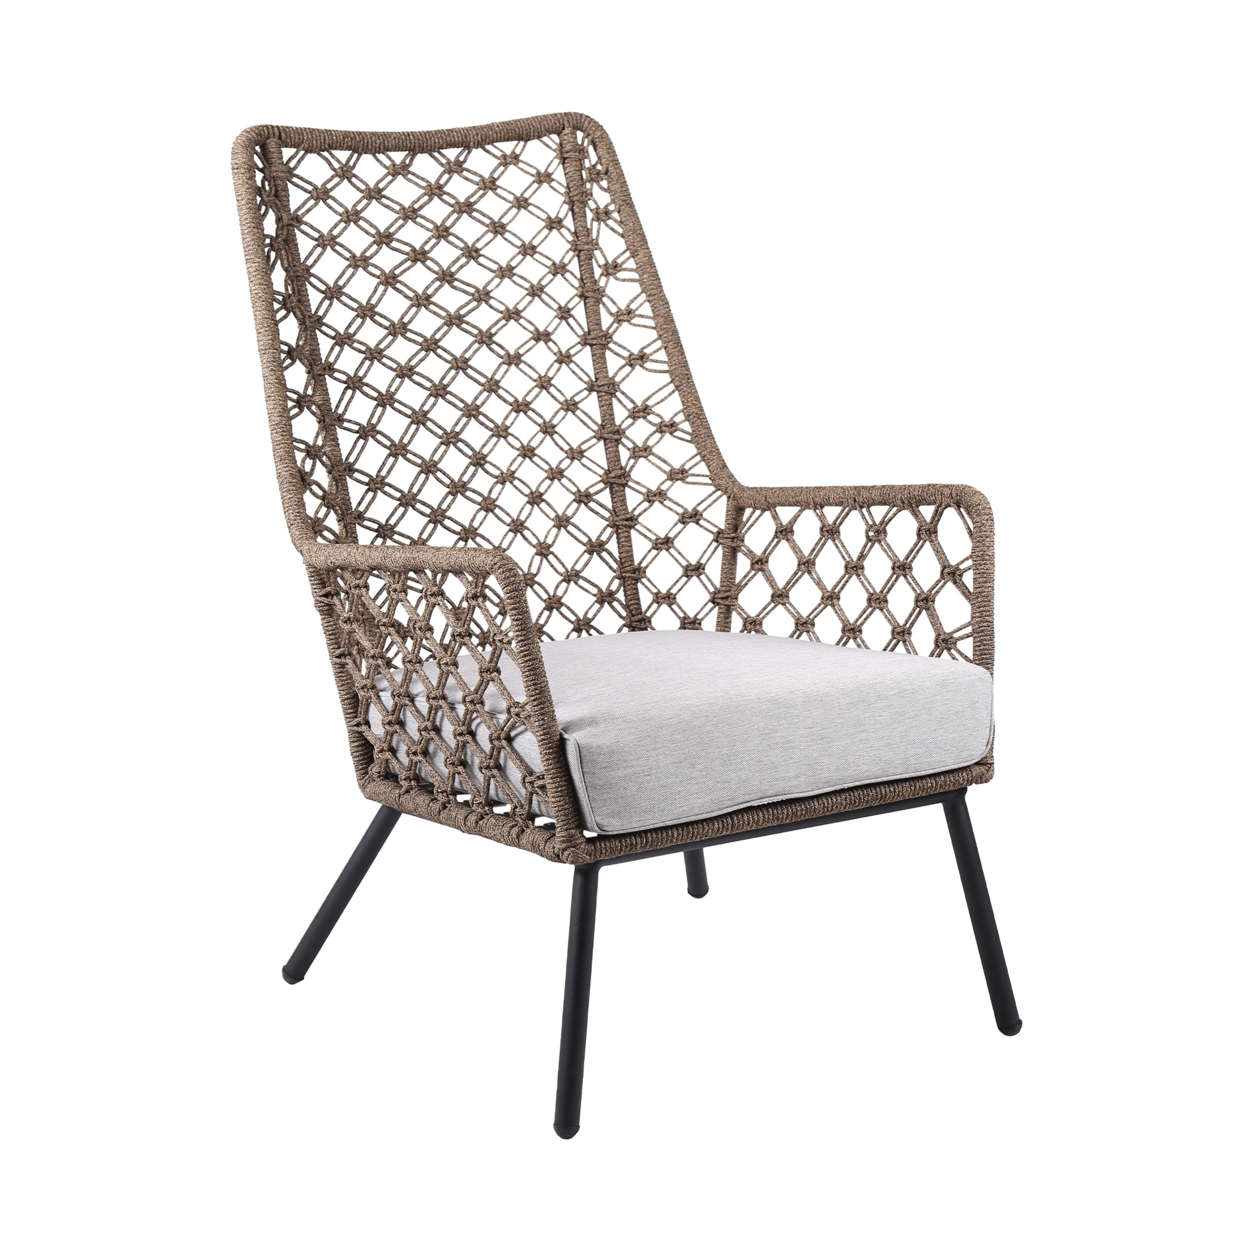 Indoor Outdoor Lounge Chair With Intricate Woven Lattice Back, Brown- Saltoro Sherpi